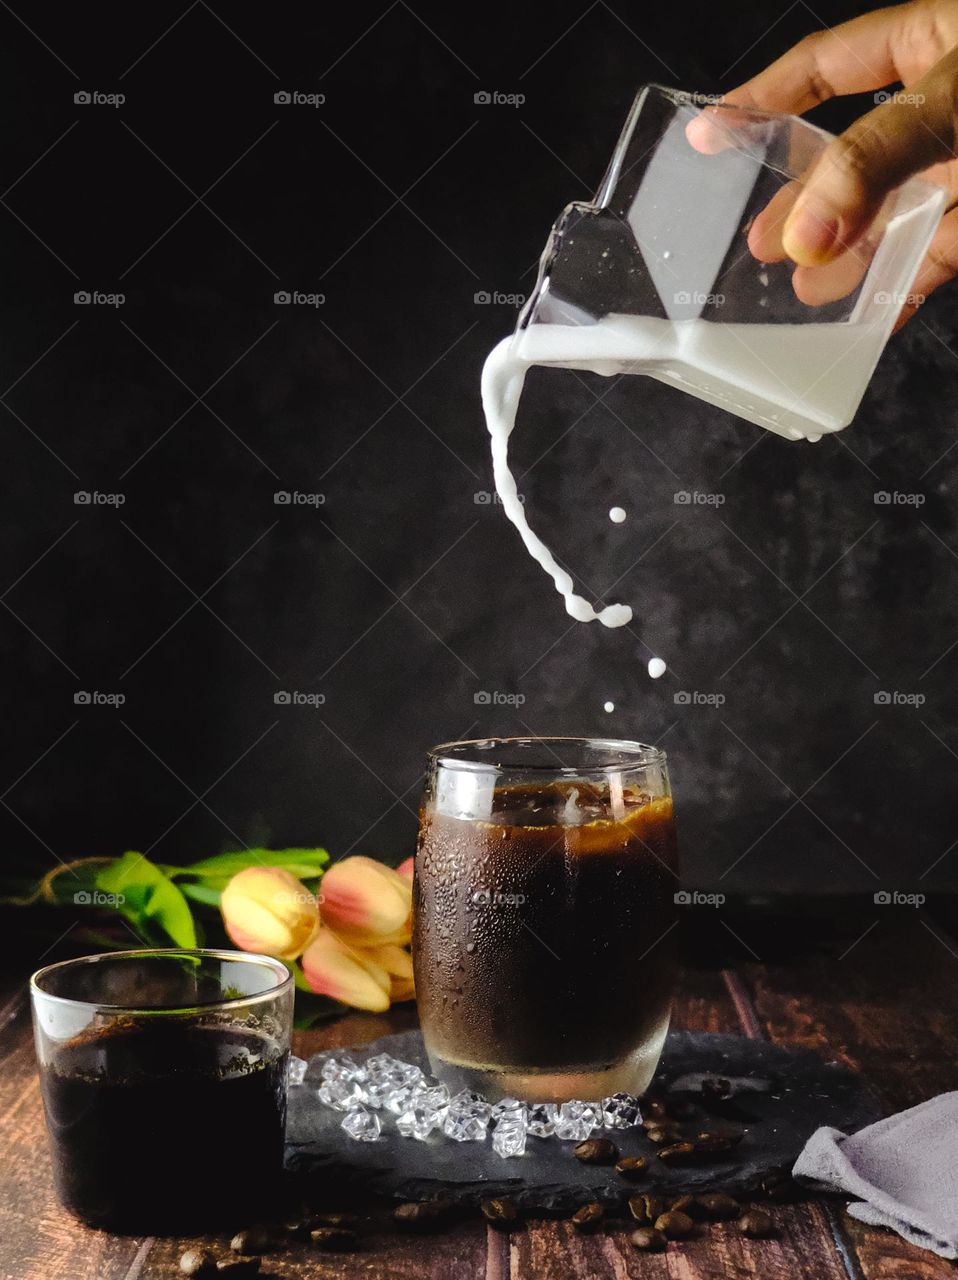 Woman pouring milk from glass jug into one of two glasses with espresso coffee on wooden stand with dark background.